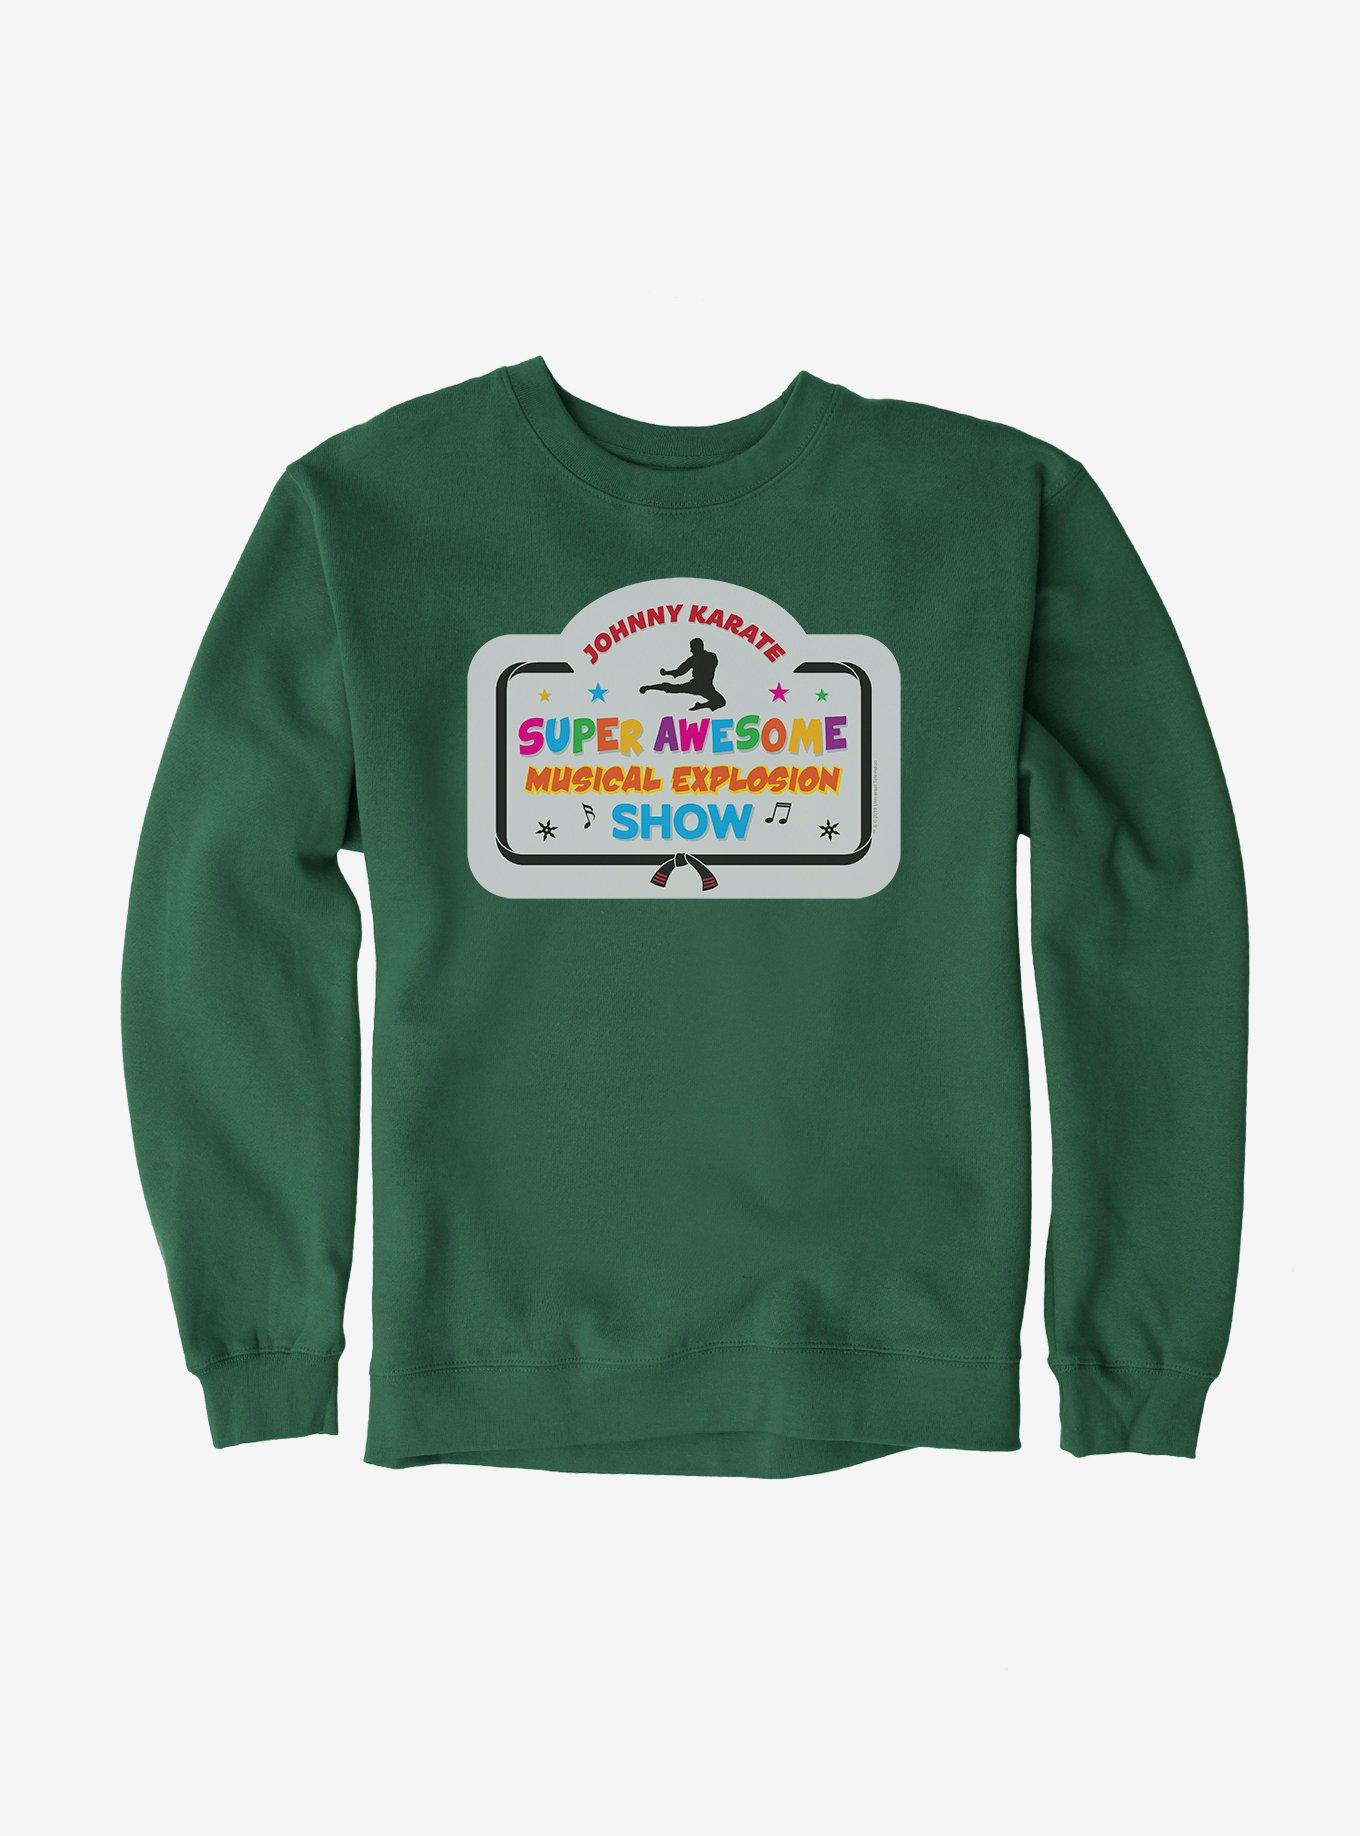 Parks And Recreation Johnny Karate Show Banner Sweatshirt, FOREST GREEN, hi-res